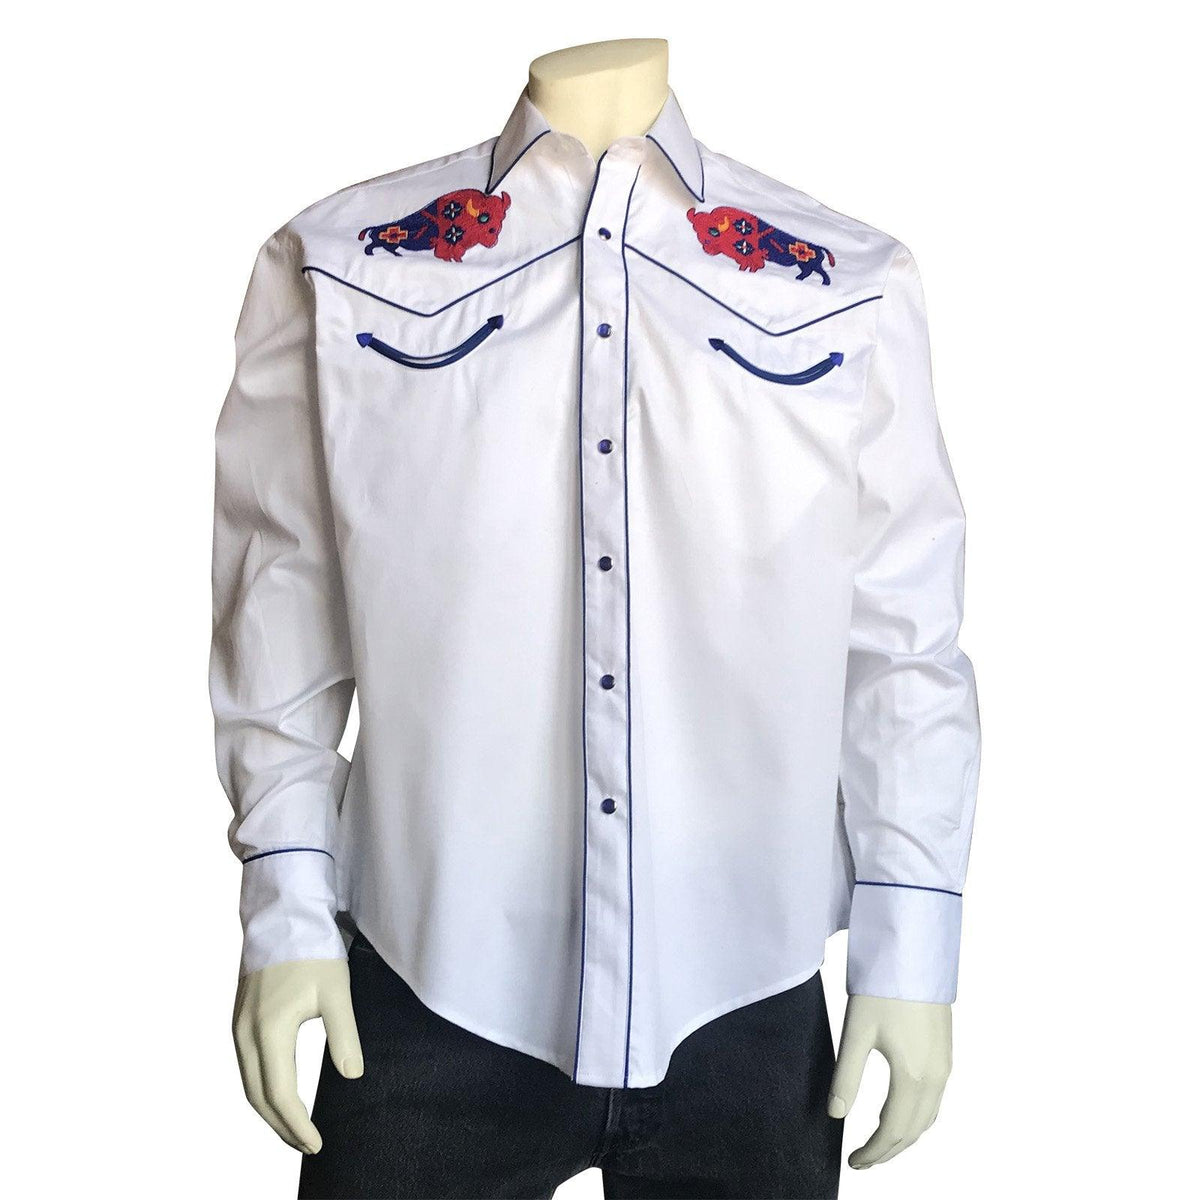 Men’s American Bison White Embroidered Western Shirt - Flyclothing LLC